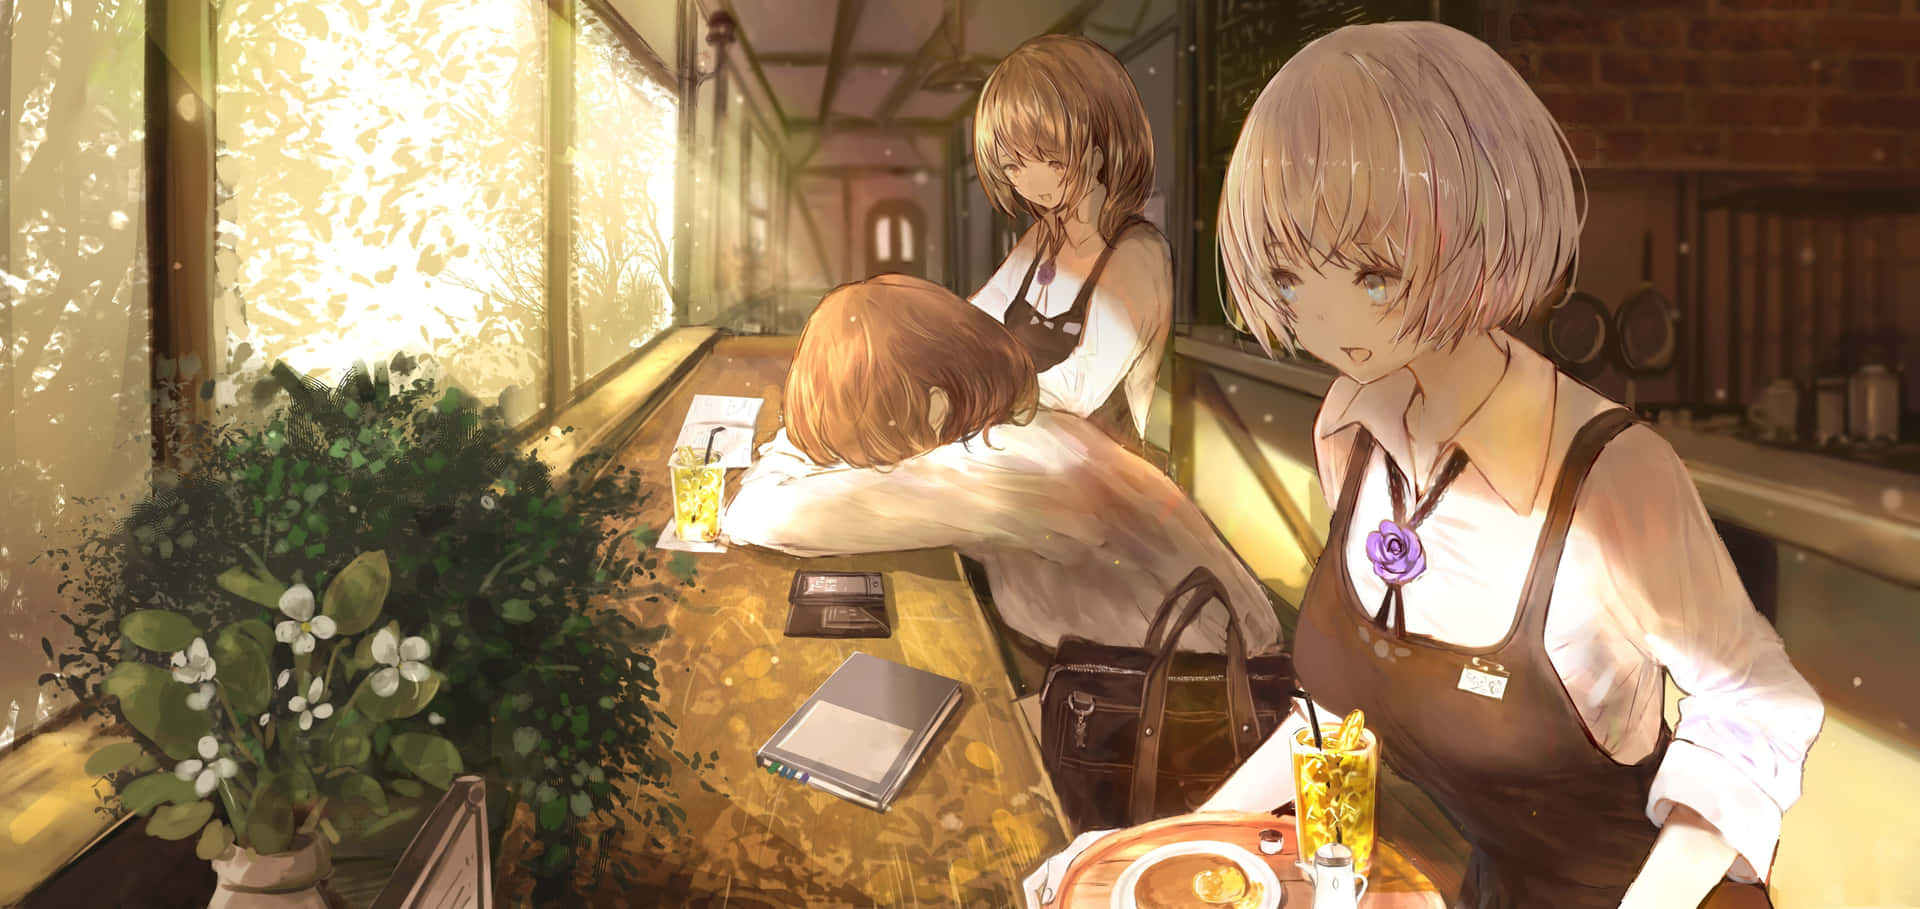 Animeeleverpå Kafé (for A Computer Or Mobile Wallpaper Featuring Anime Students At A Café) Wallpaper